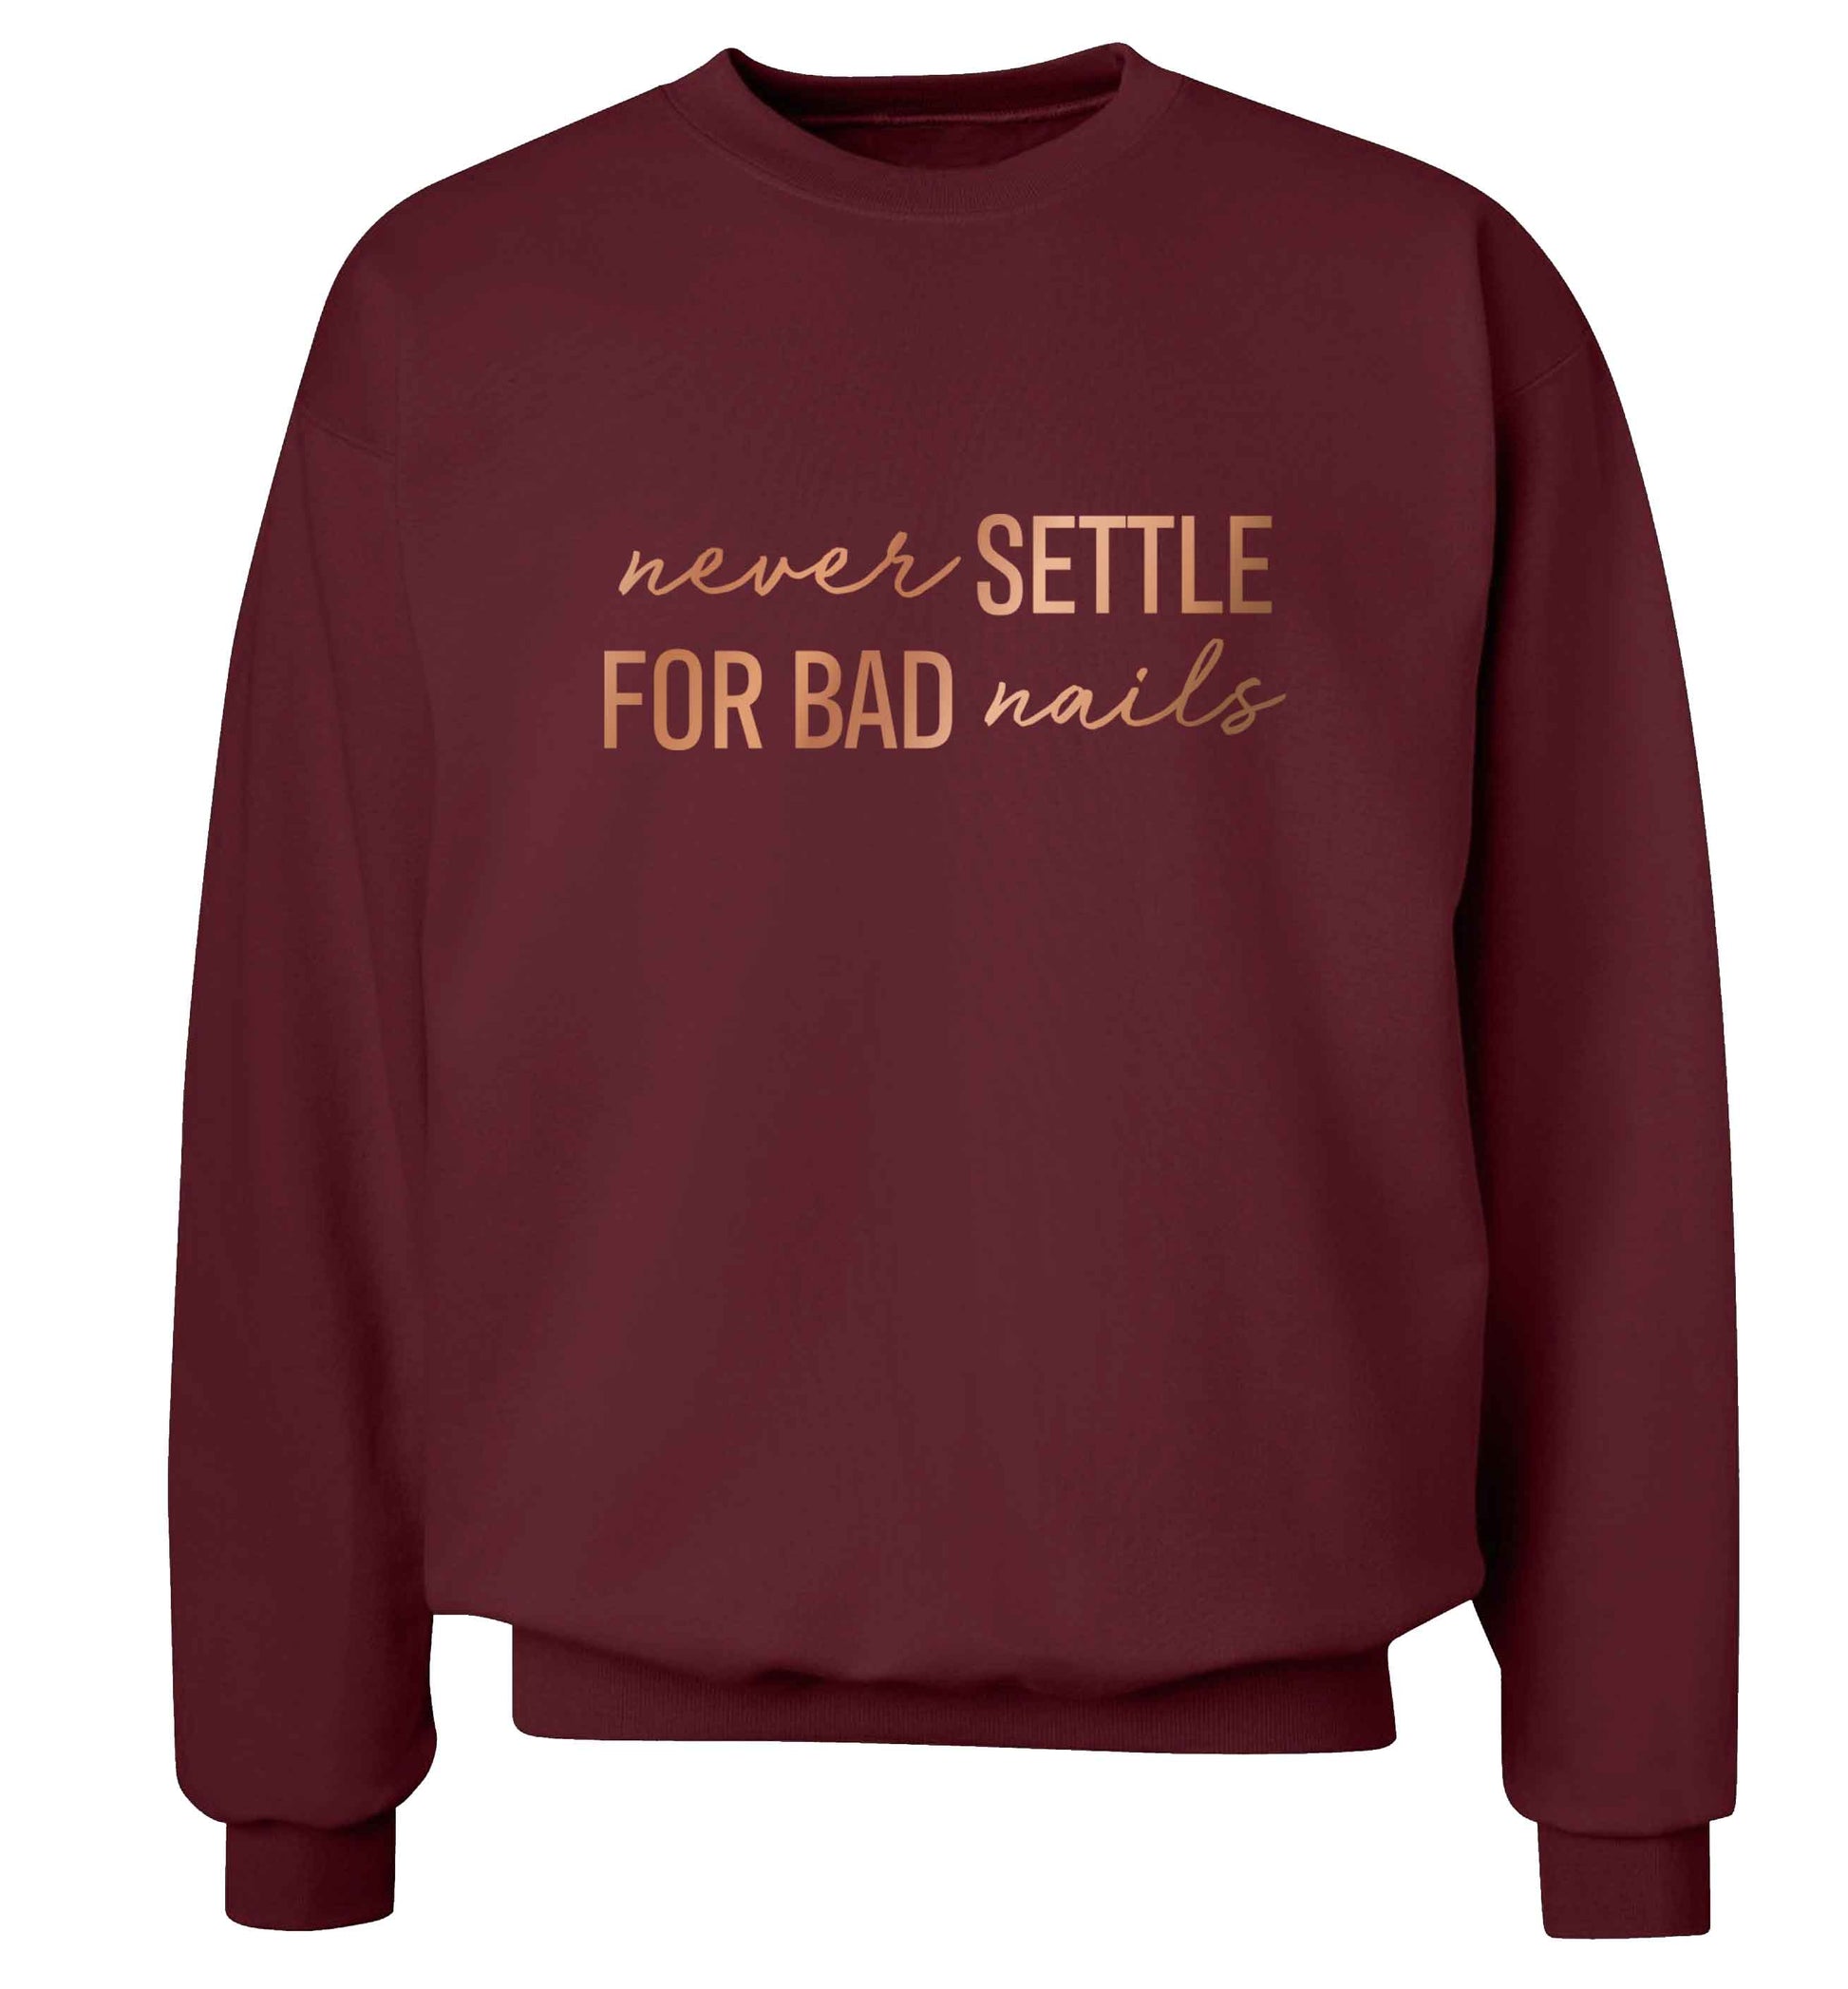 Never settle for bad nails - rose gold adult's unisex maroon sweater 2XL